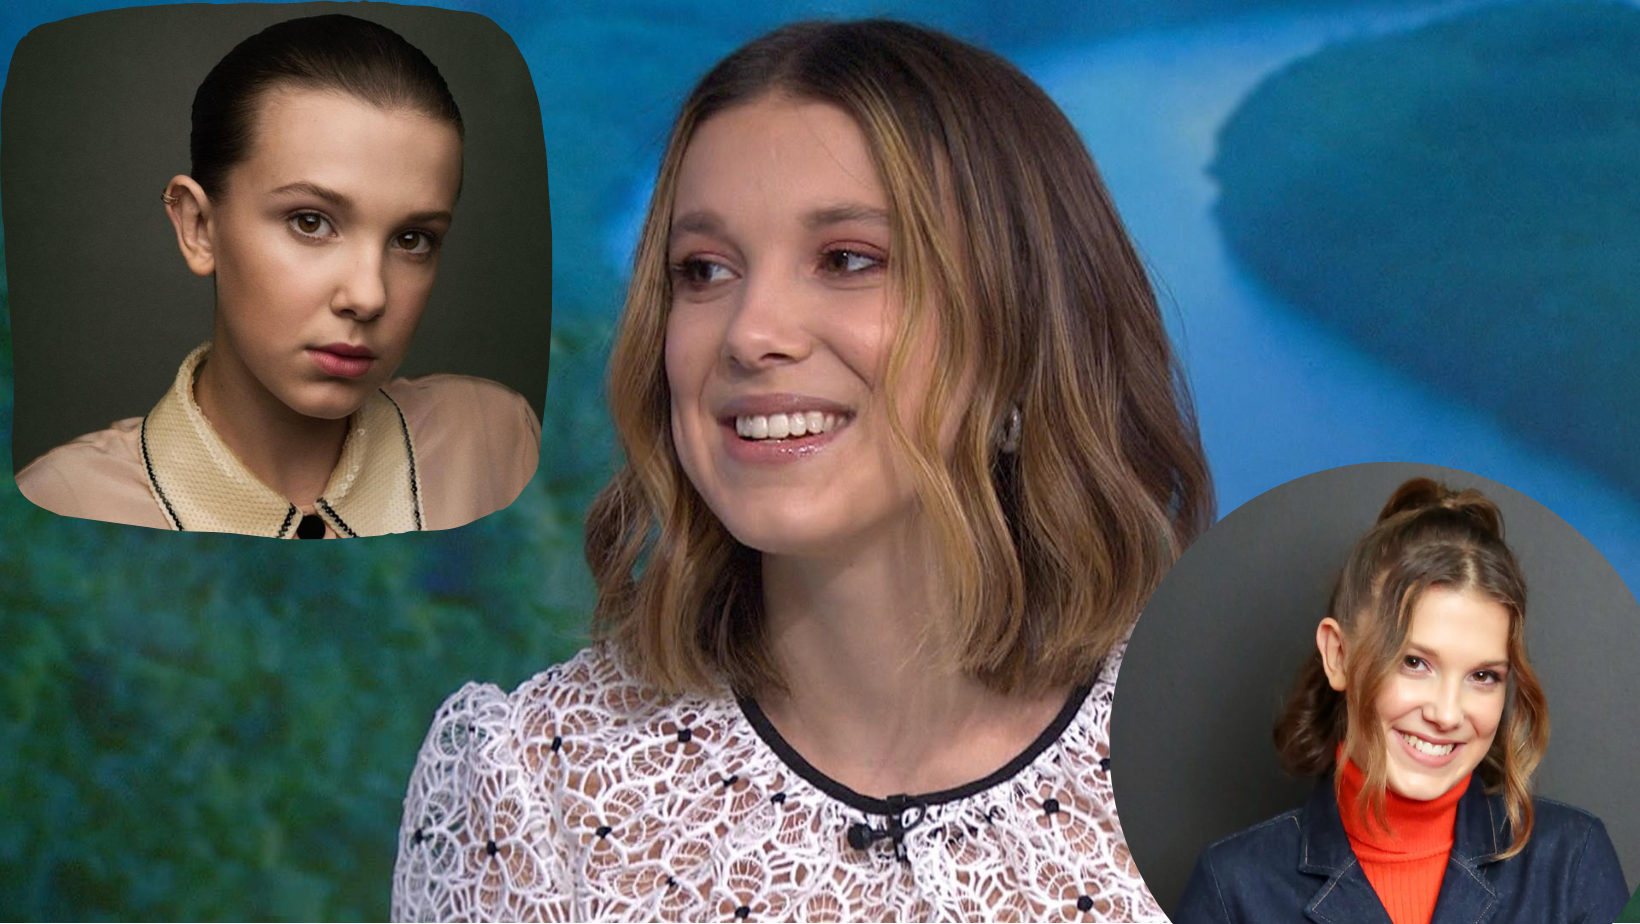 Millie Bobby Brown is reviving an age-old summer aesthetic with her hair, and it’s absolutely stunning

+2023